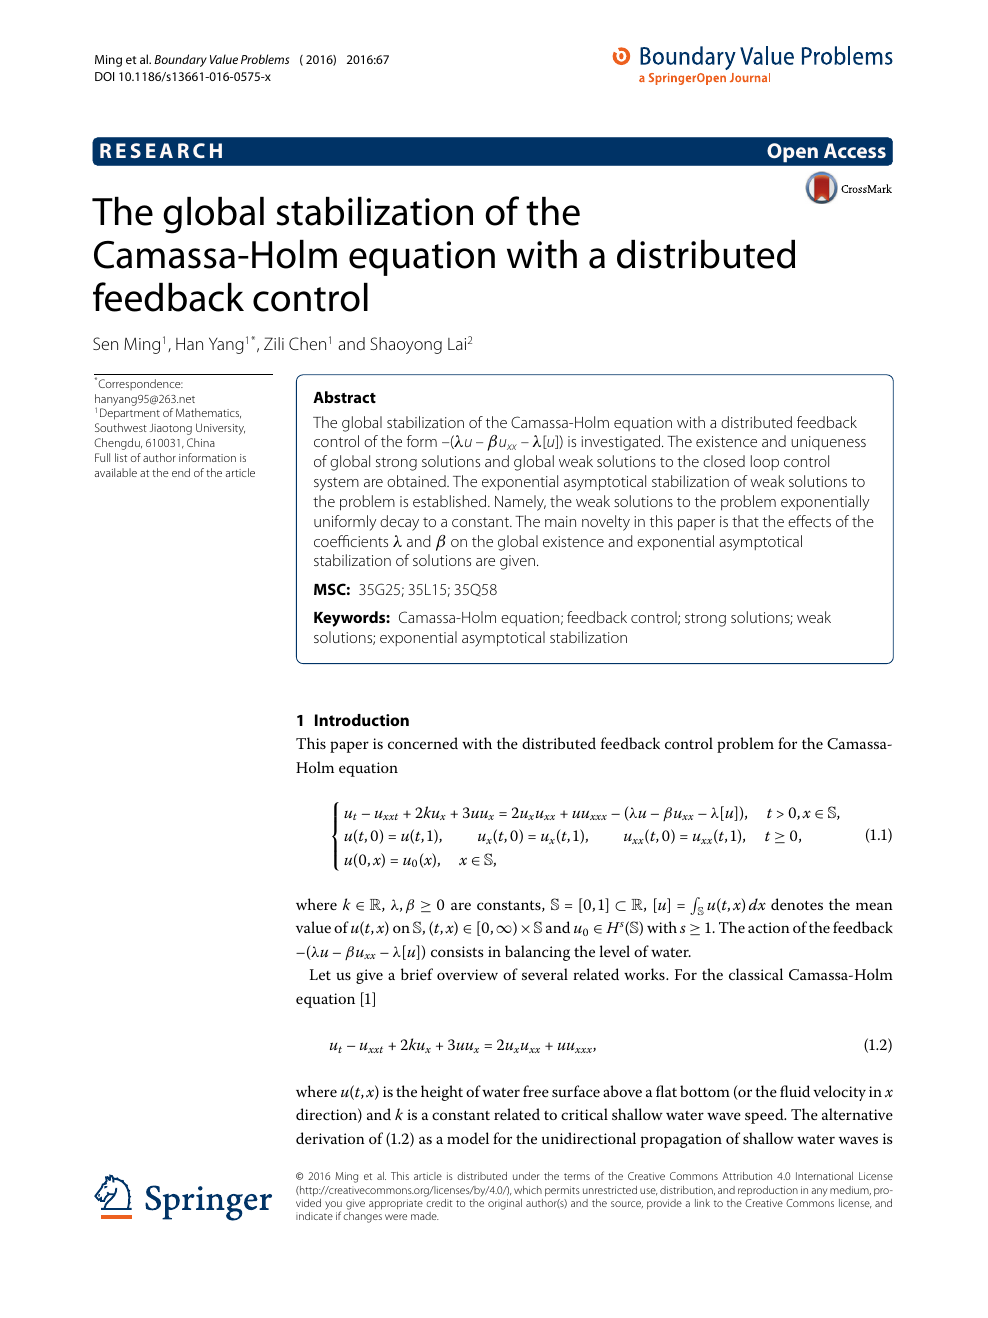 The Global Stabilization Of The Camassa Holm Equation With A Distributed Feedback Control Topic Of Research Paper In Mathematics Download Scholarly Article Pdf And Read For Free On Cyberleninka Open Science Hub